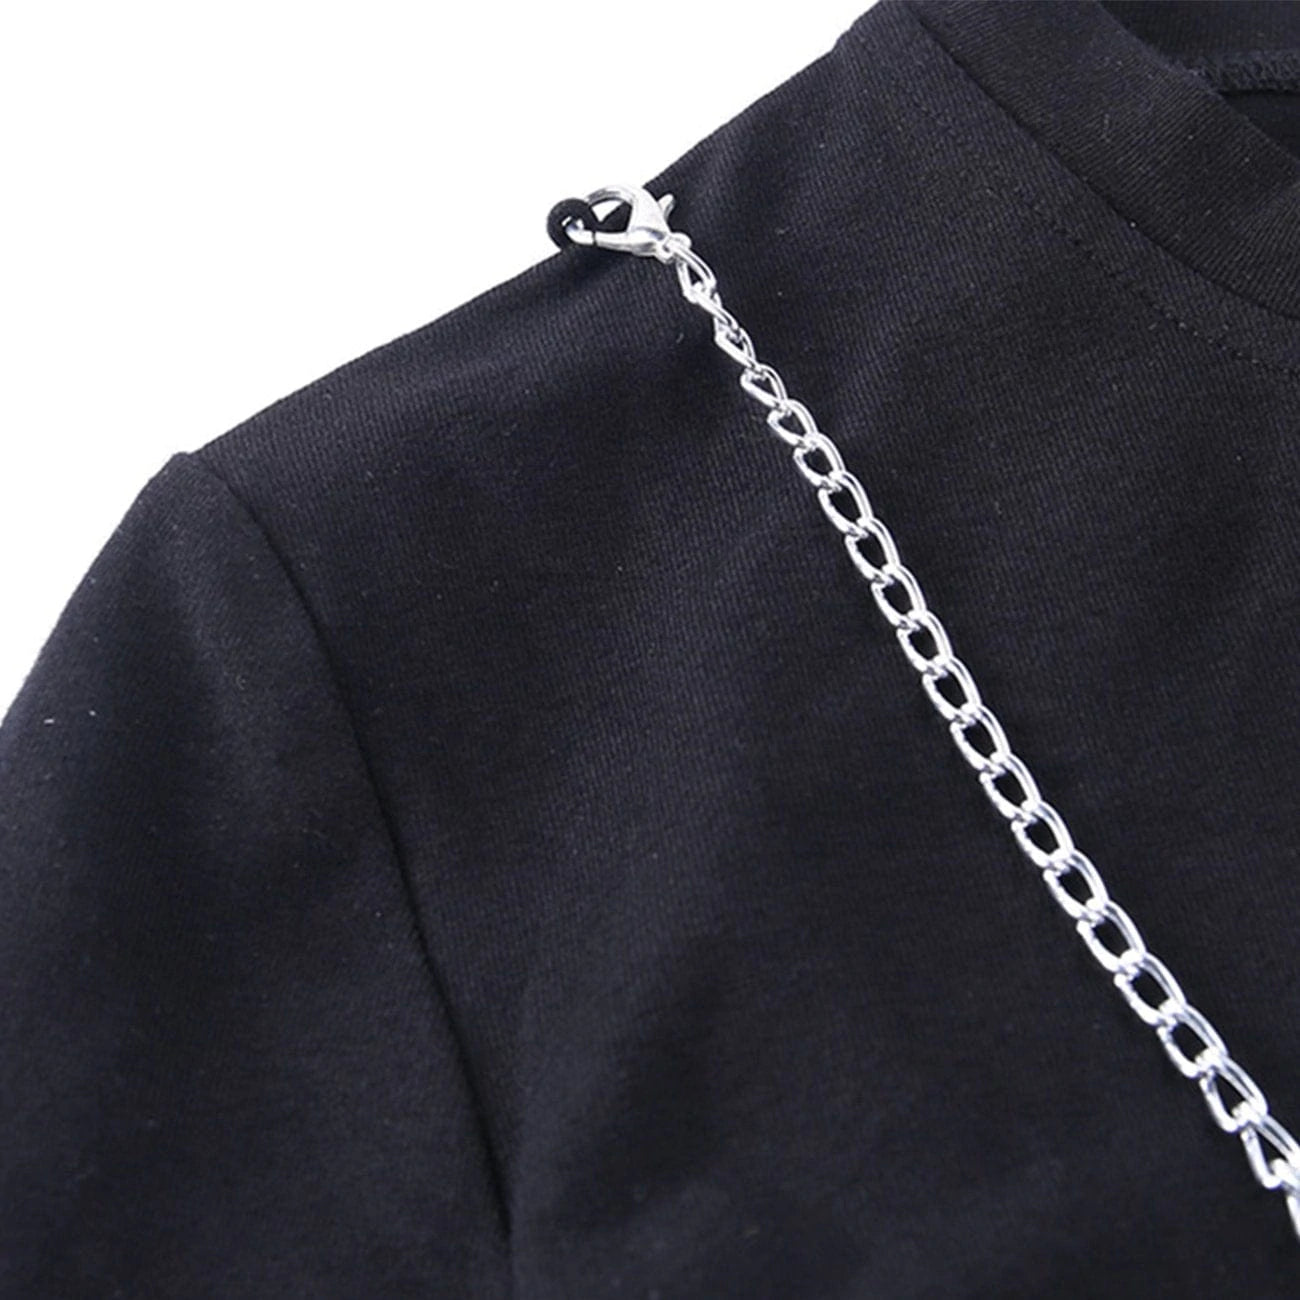 TO Chain Accessories Long Sleeve Tee